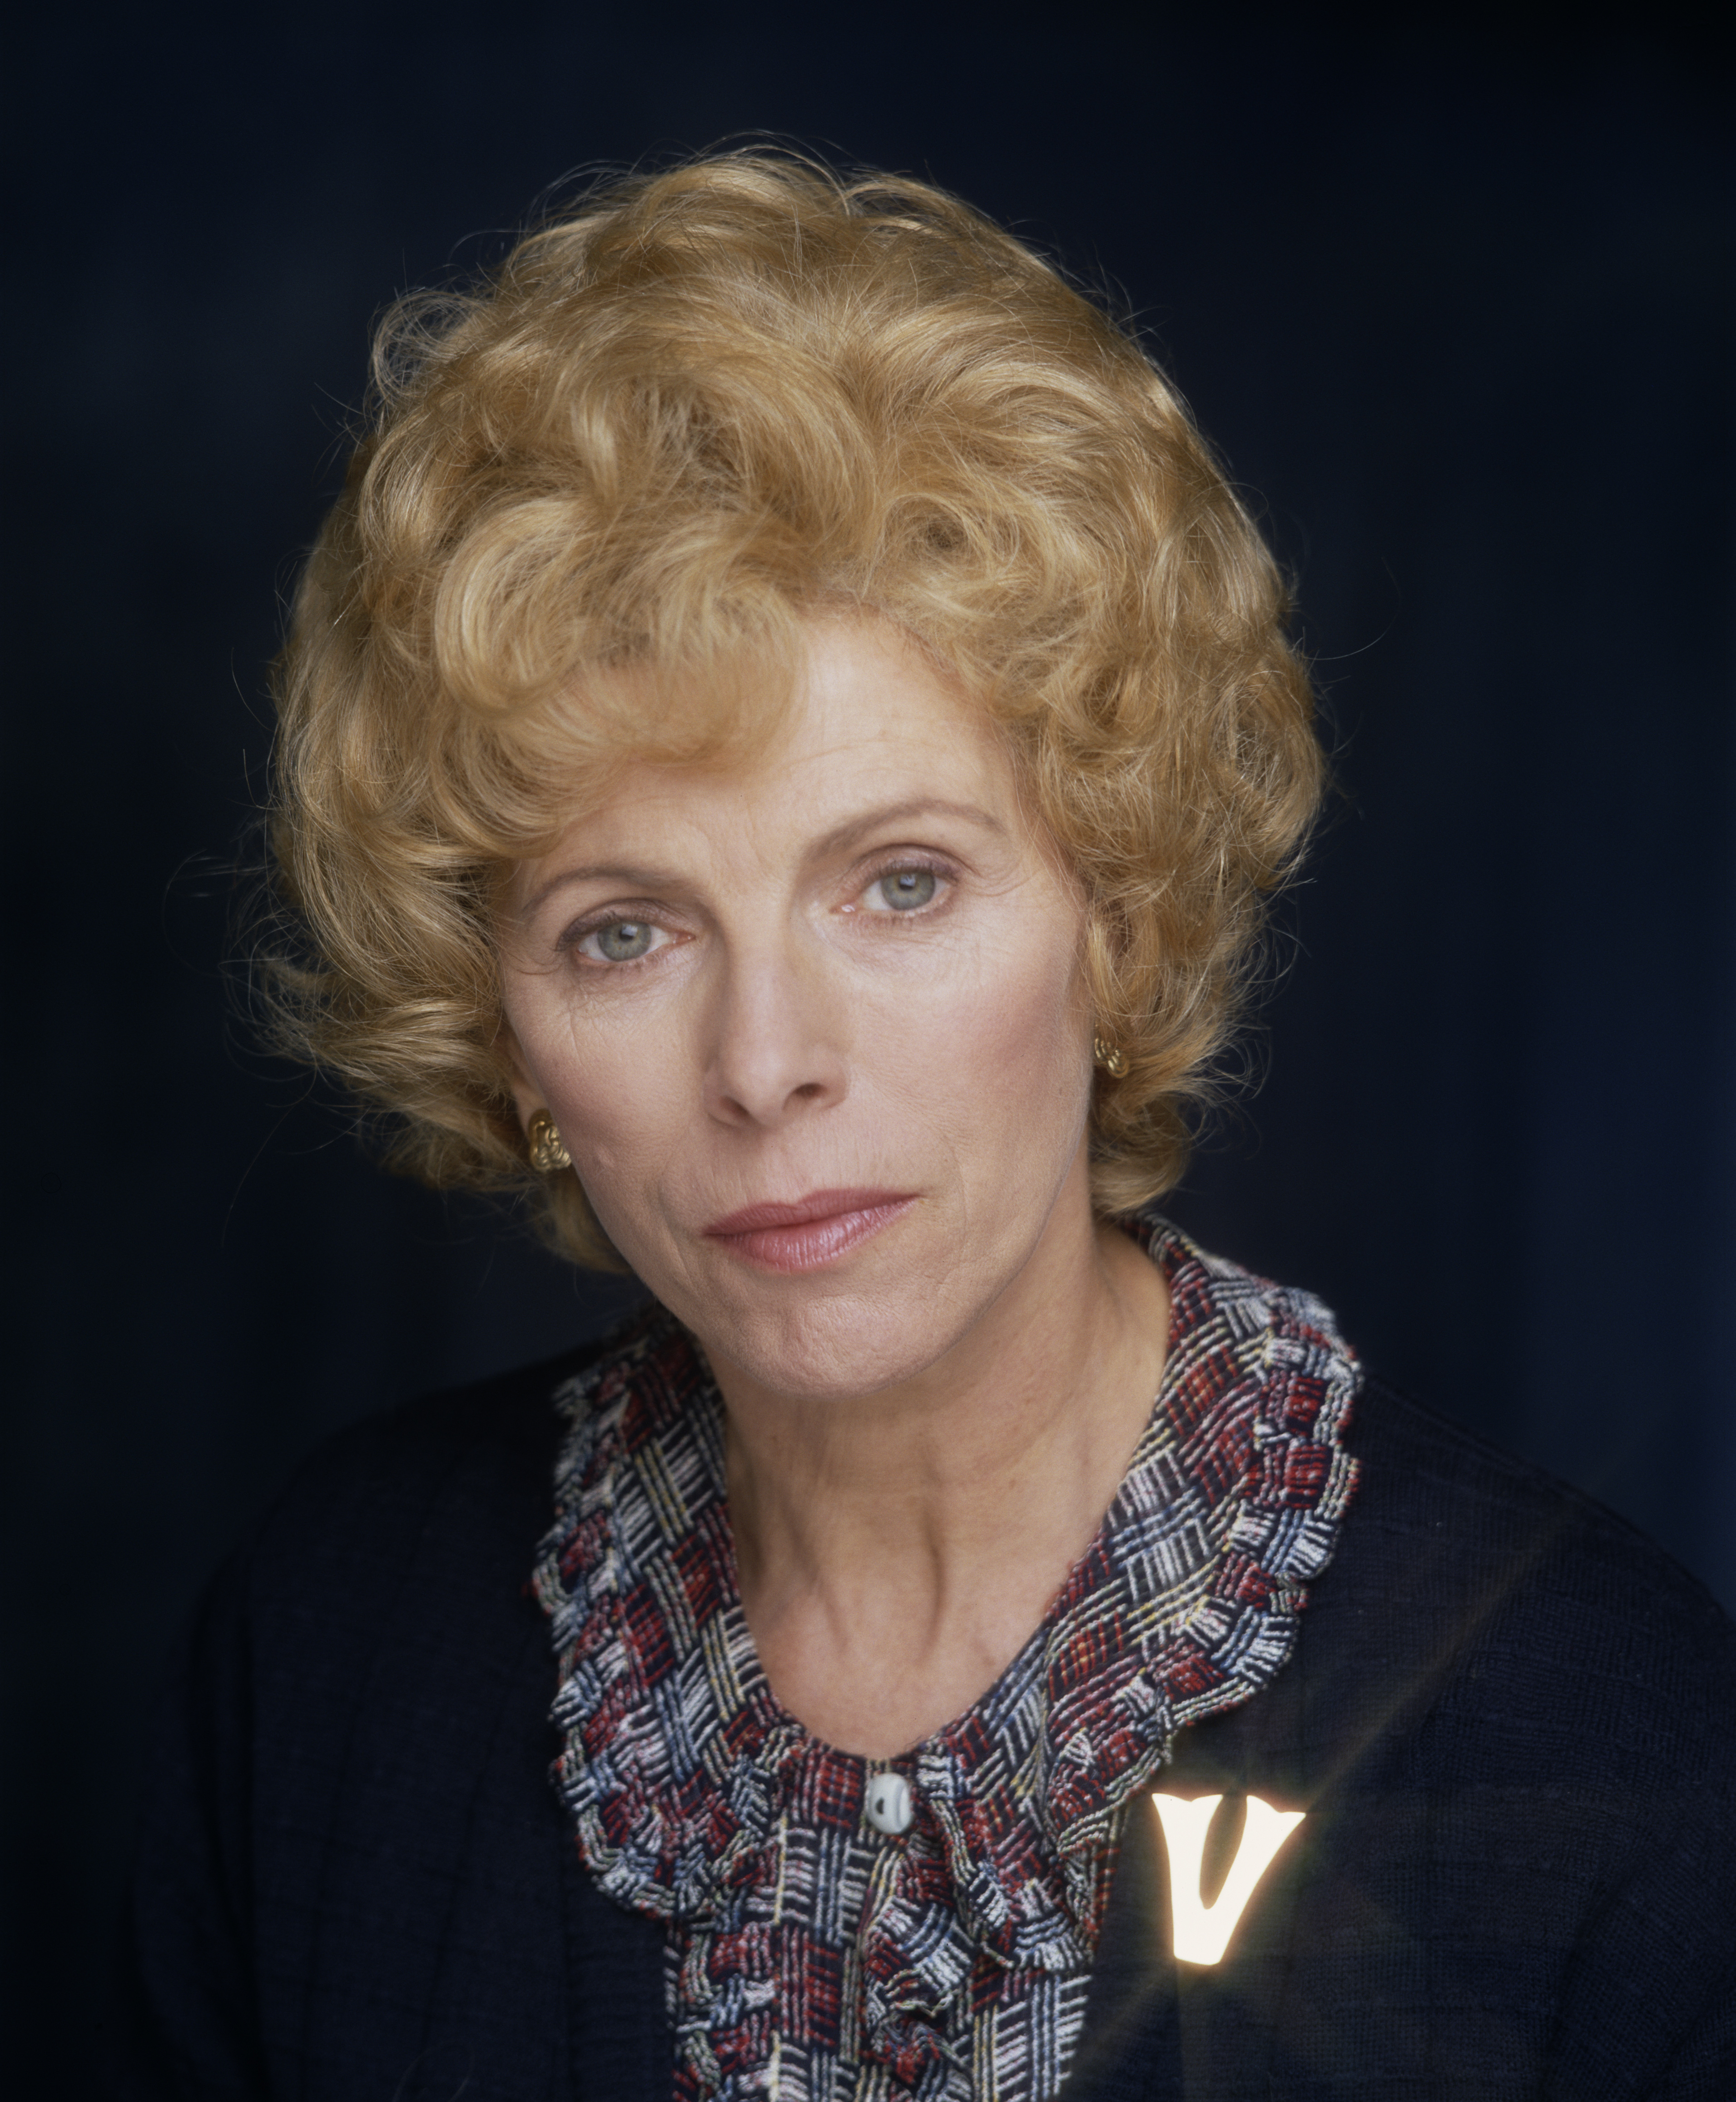 English actress Billie Whitelaw as Violet Kray in the film 'The Krays' in 1990.